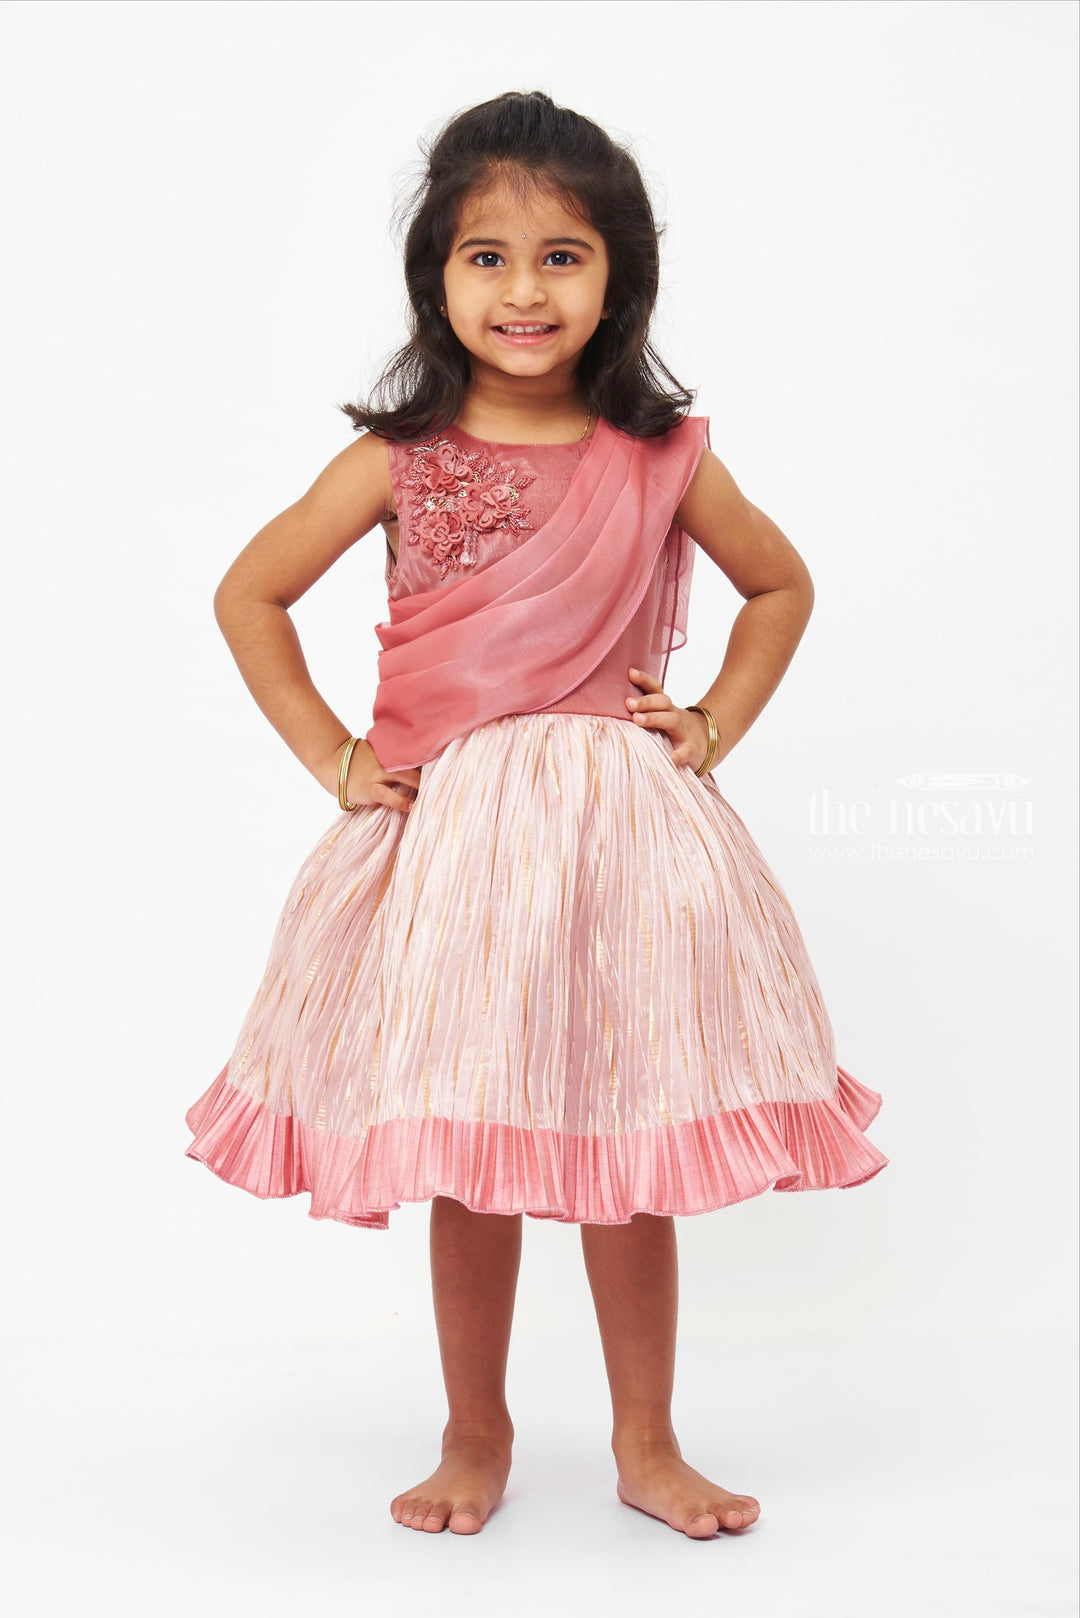 The Nesavu Girls Fancy Party Frock Elegant Rose Gold Layered Party Frock with Embellished Bodice Nesavu 16 (1Y) / Pink / Organza PF164B-16 Rose Gold Girls' Party Dress - Embellished & Pleated Frock | The Nesavu